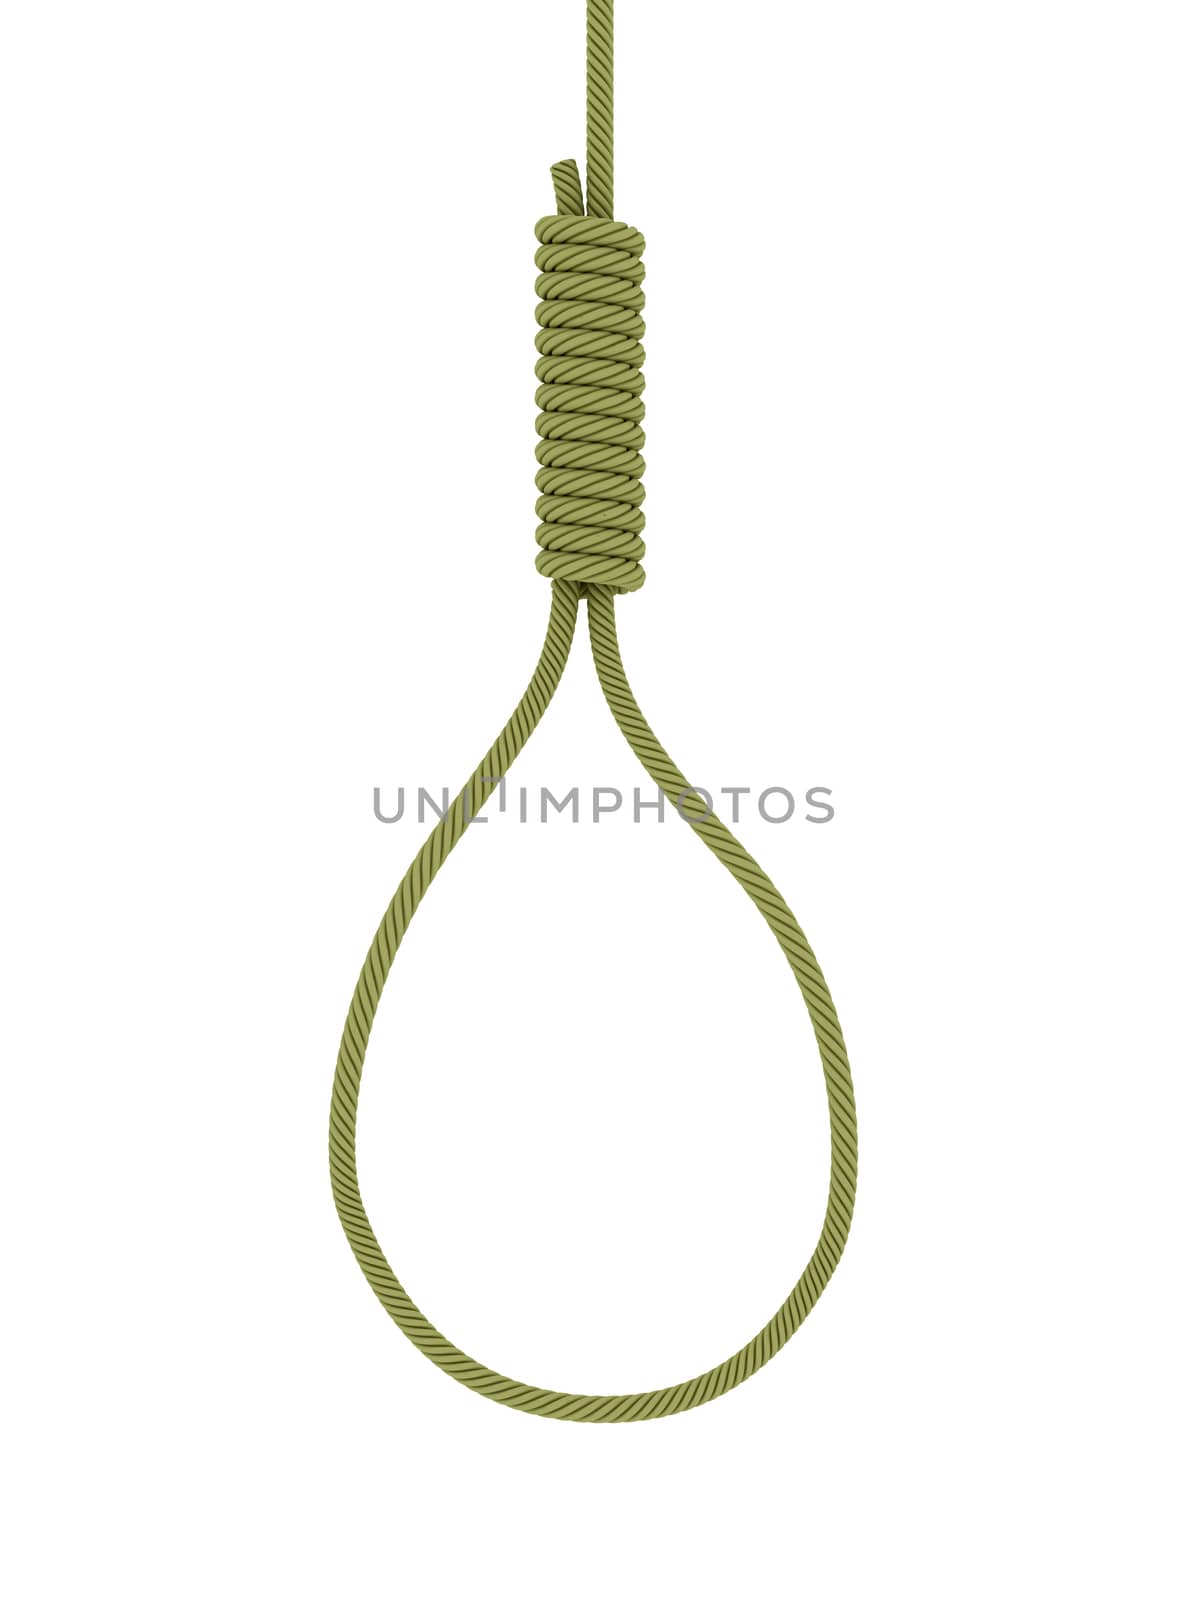 gallows on white background. Isolated 3D image by ISerg